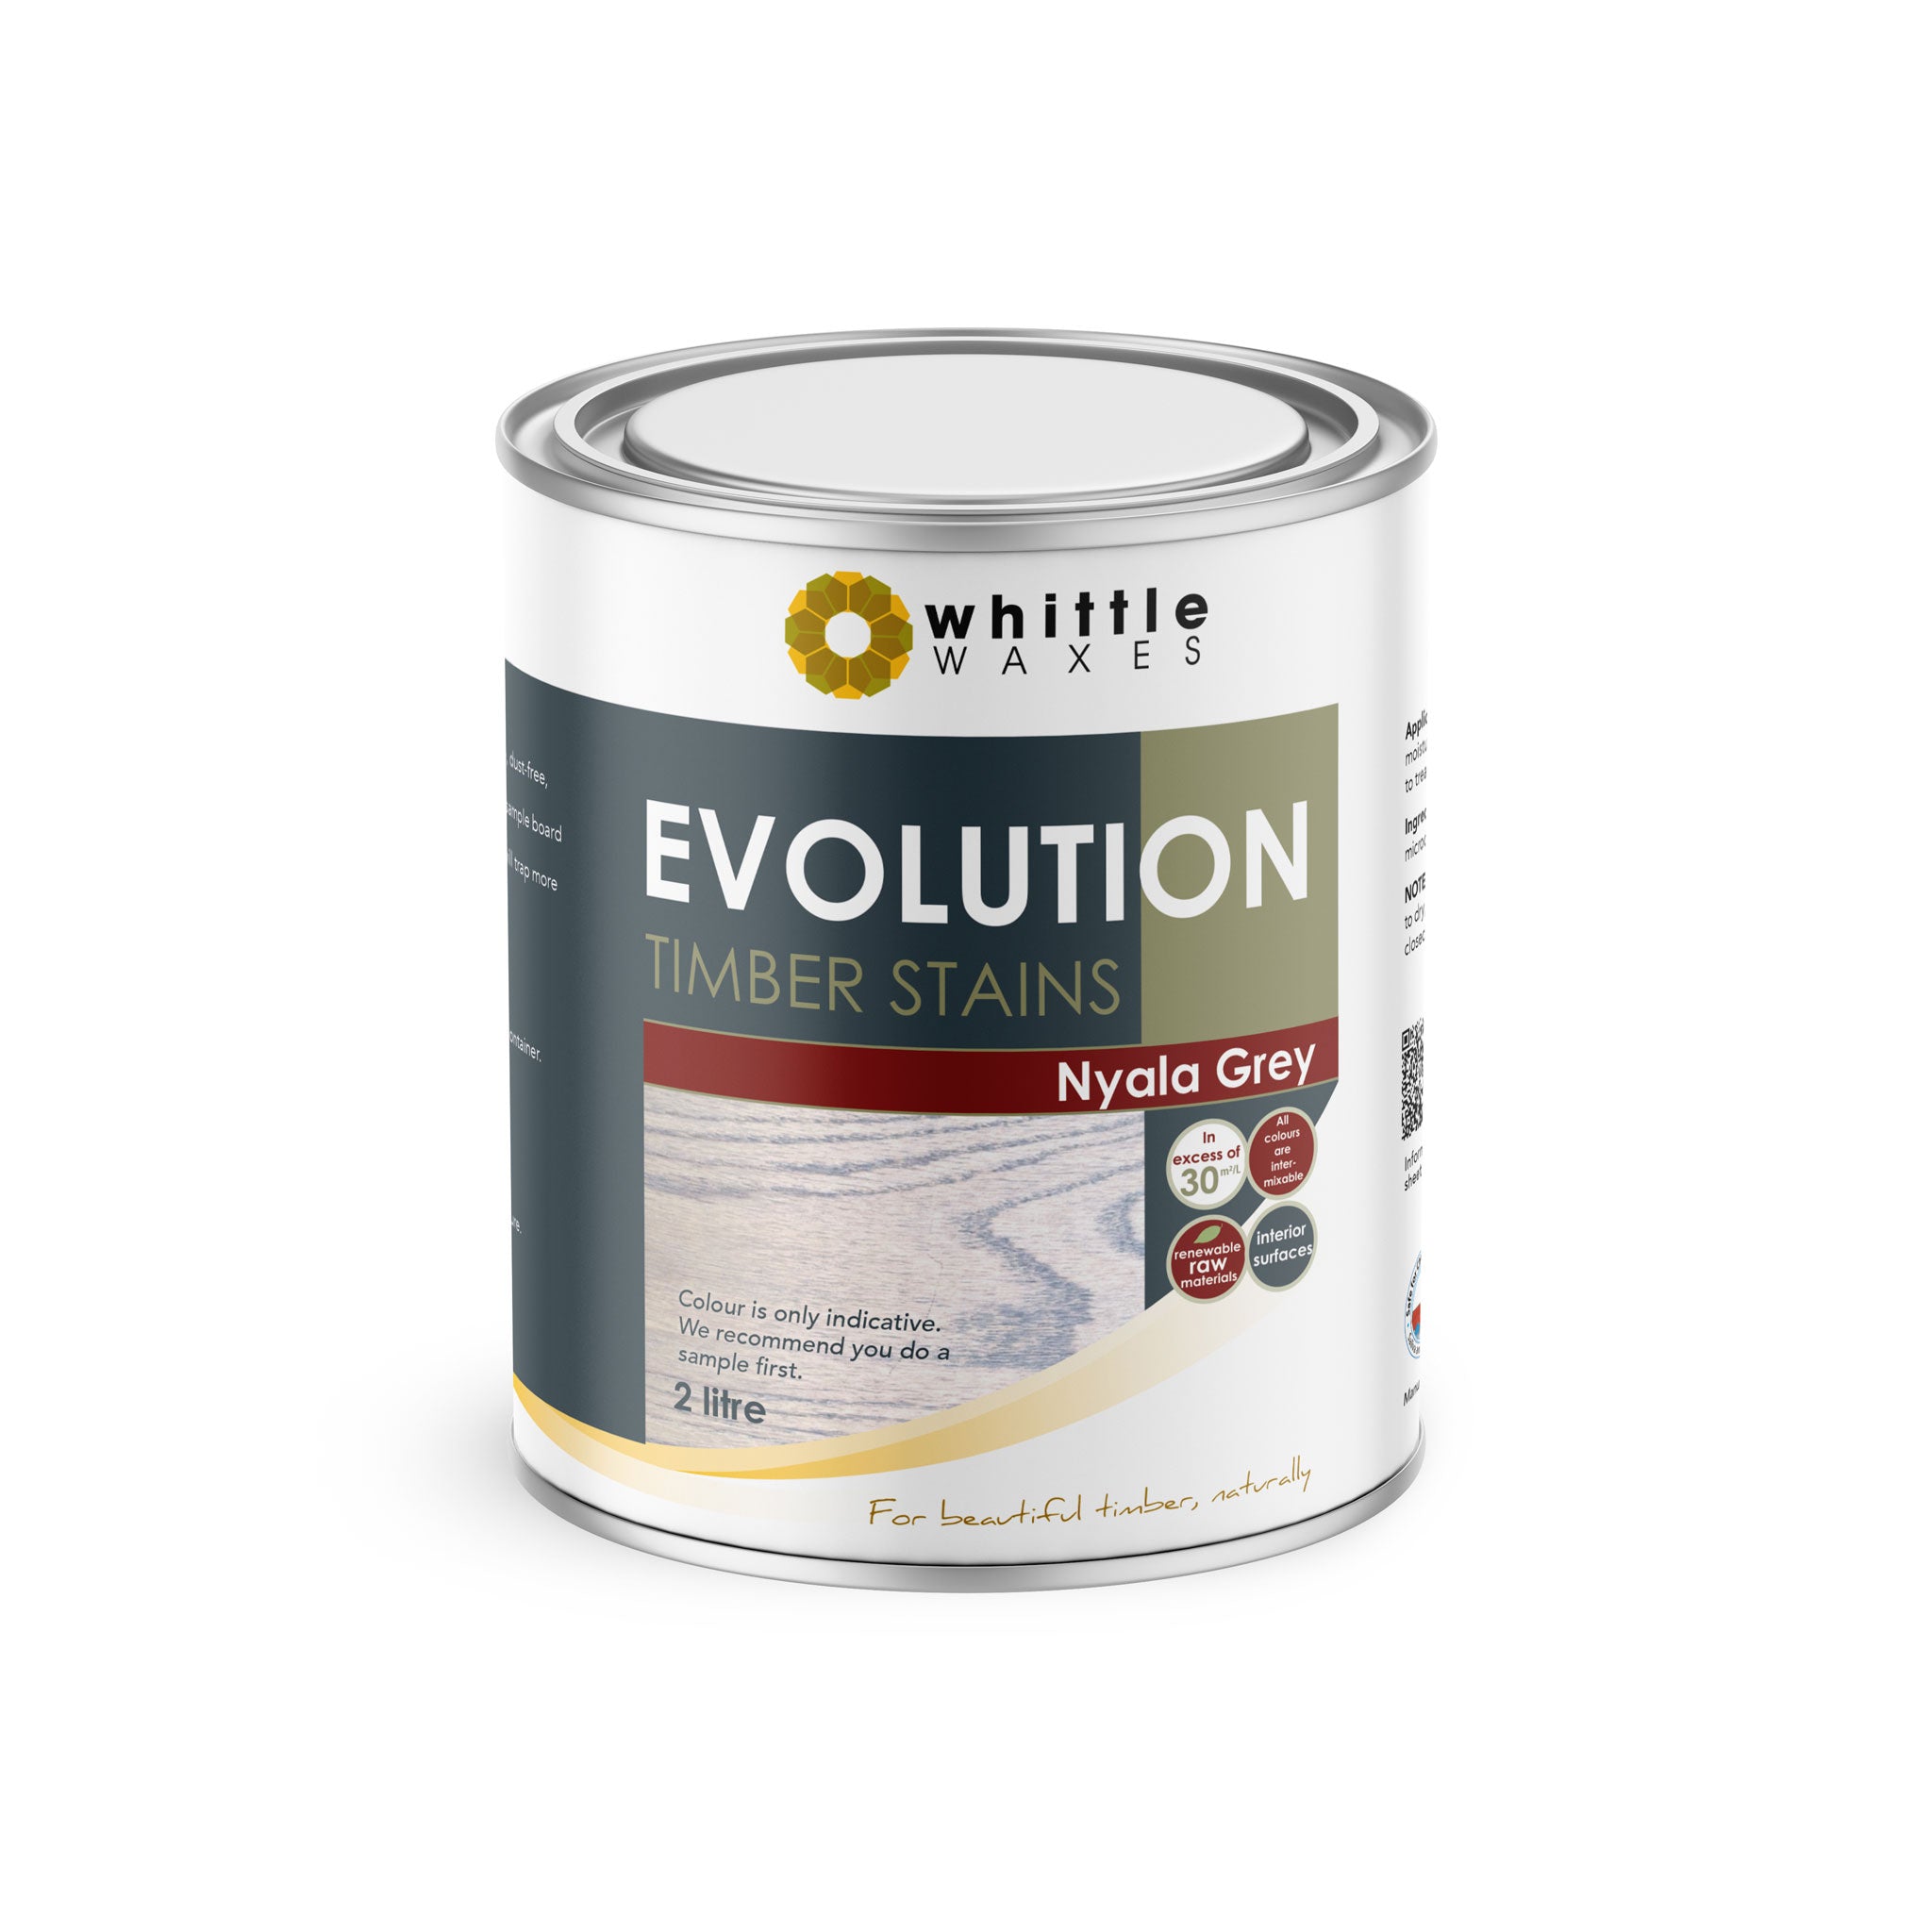 Whittle Waxes Evolution Colours (Nyala Grey) - quality timber stain - 2 Litre